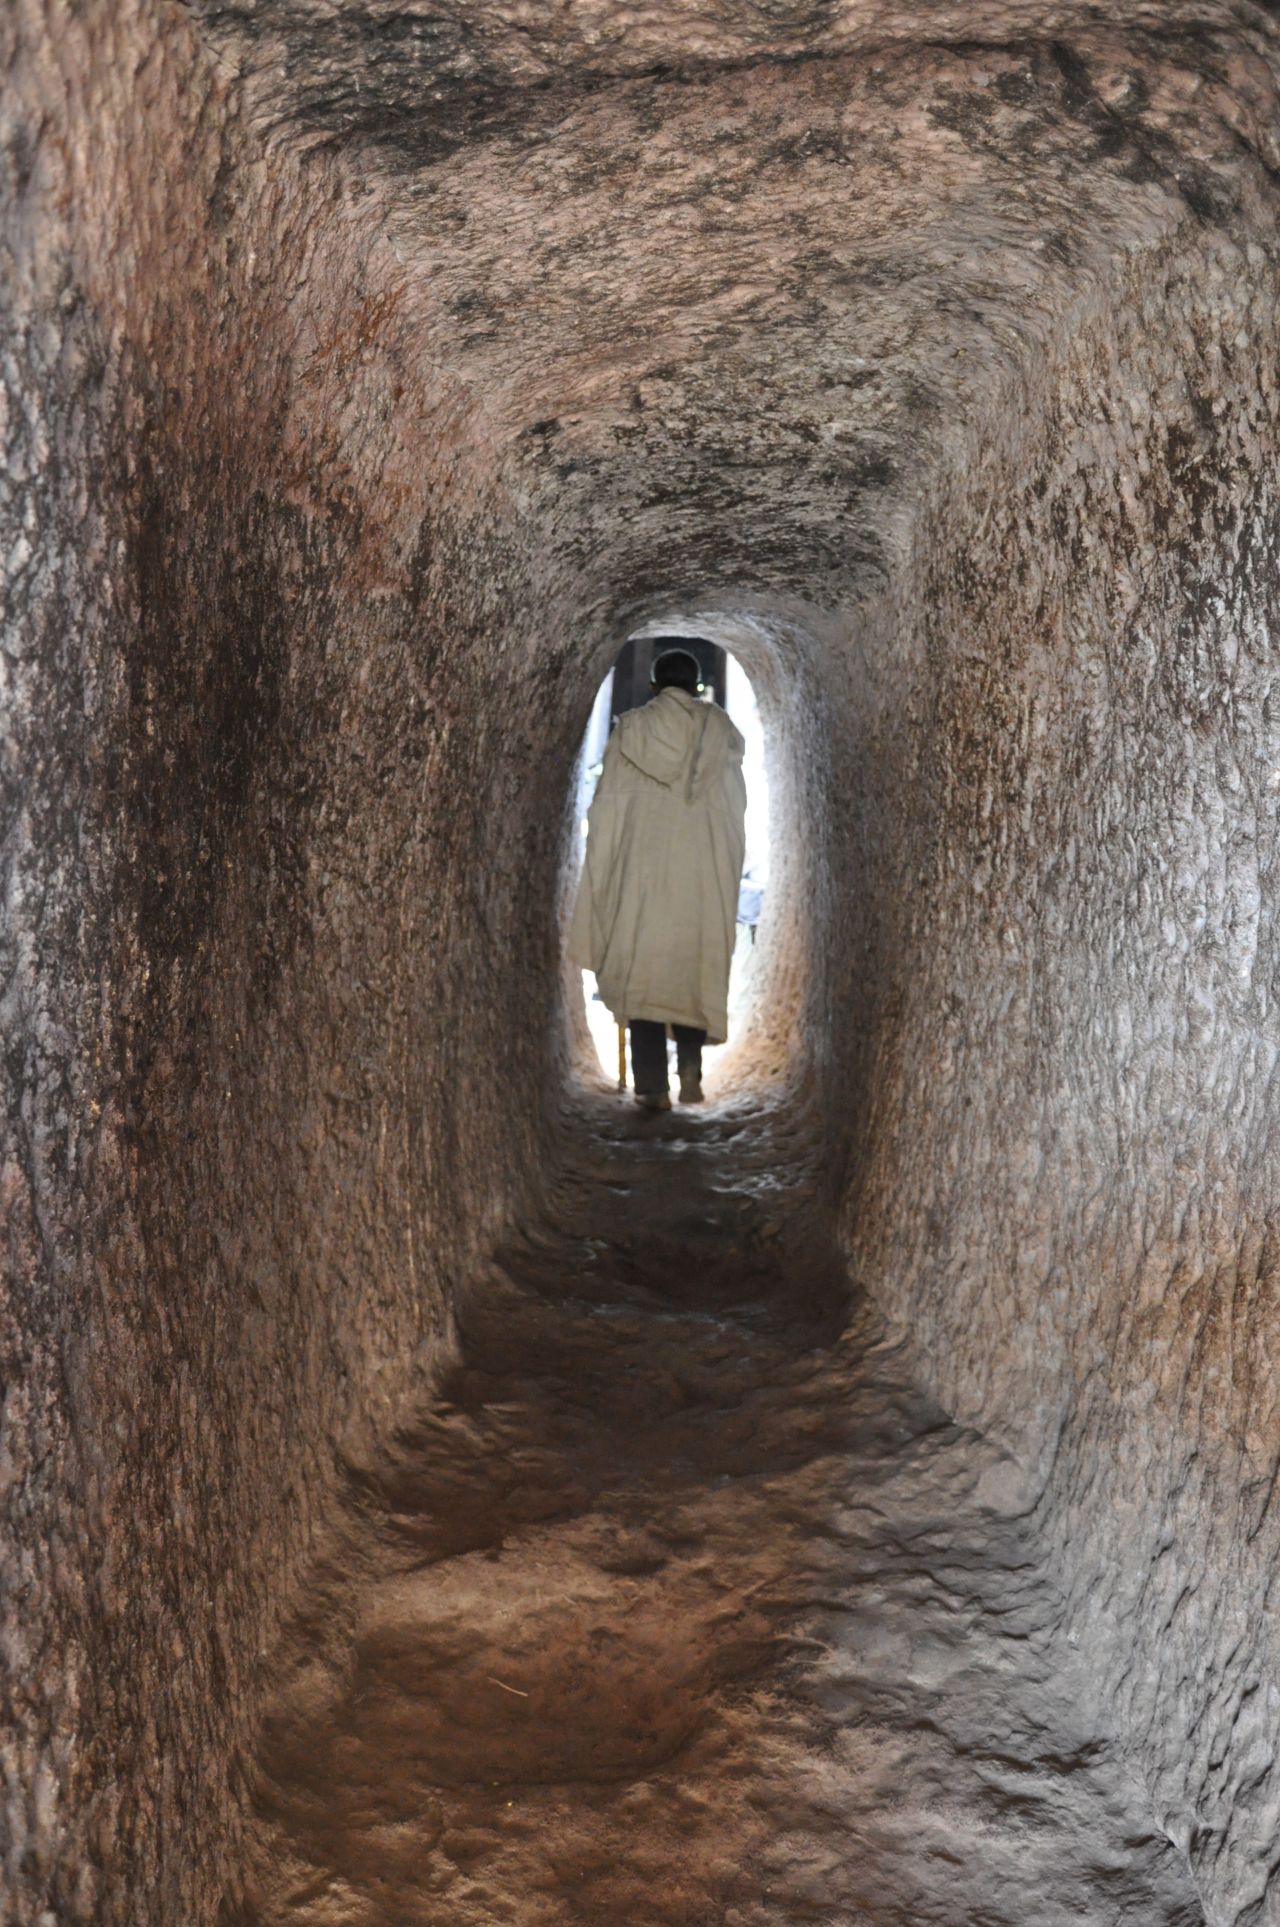 A complex and extensive system of drainage ditches, tunnels and subterranean passageways connects the underground churches, which were carved out of volcanic tuff rock.